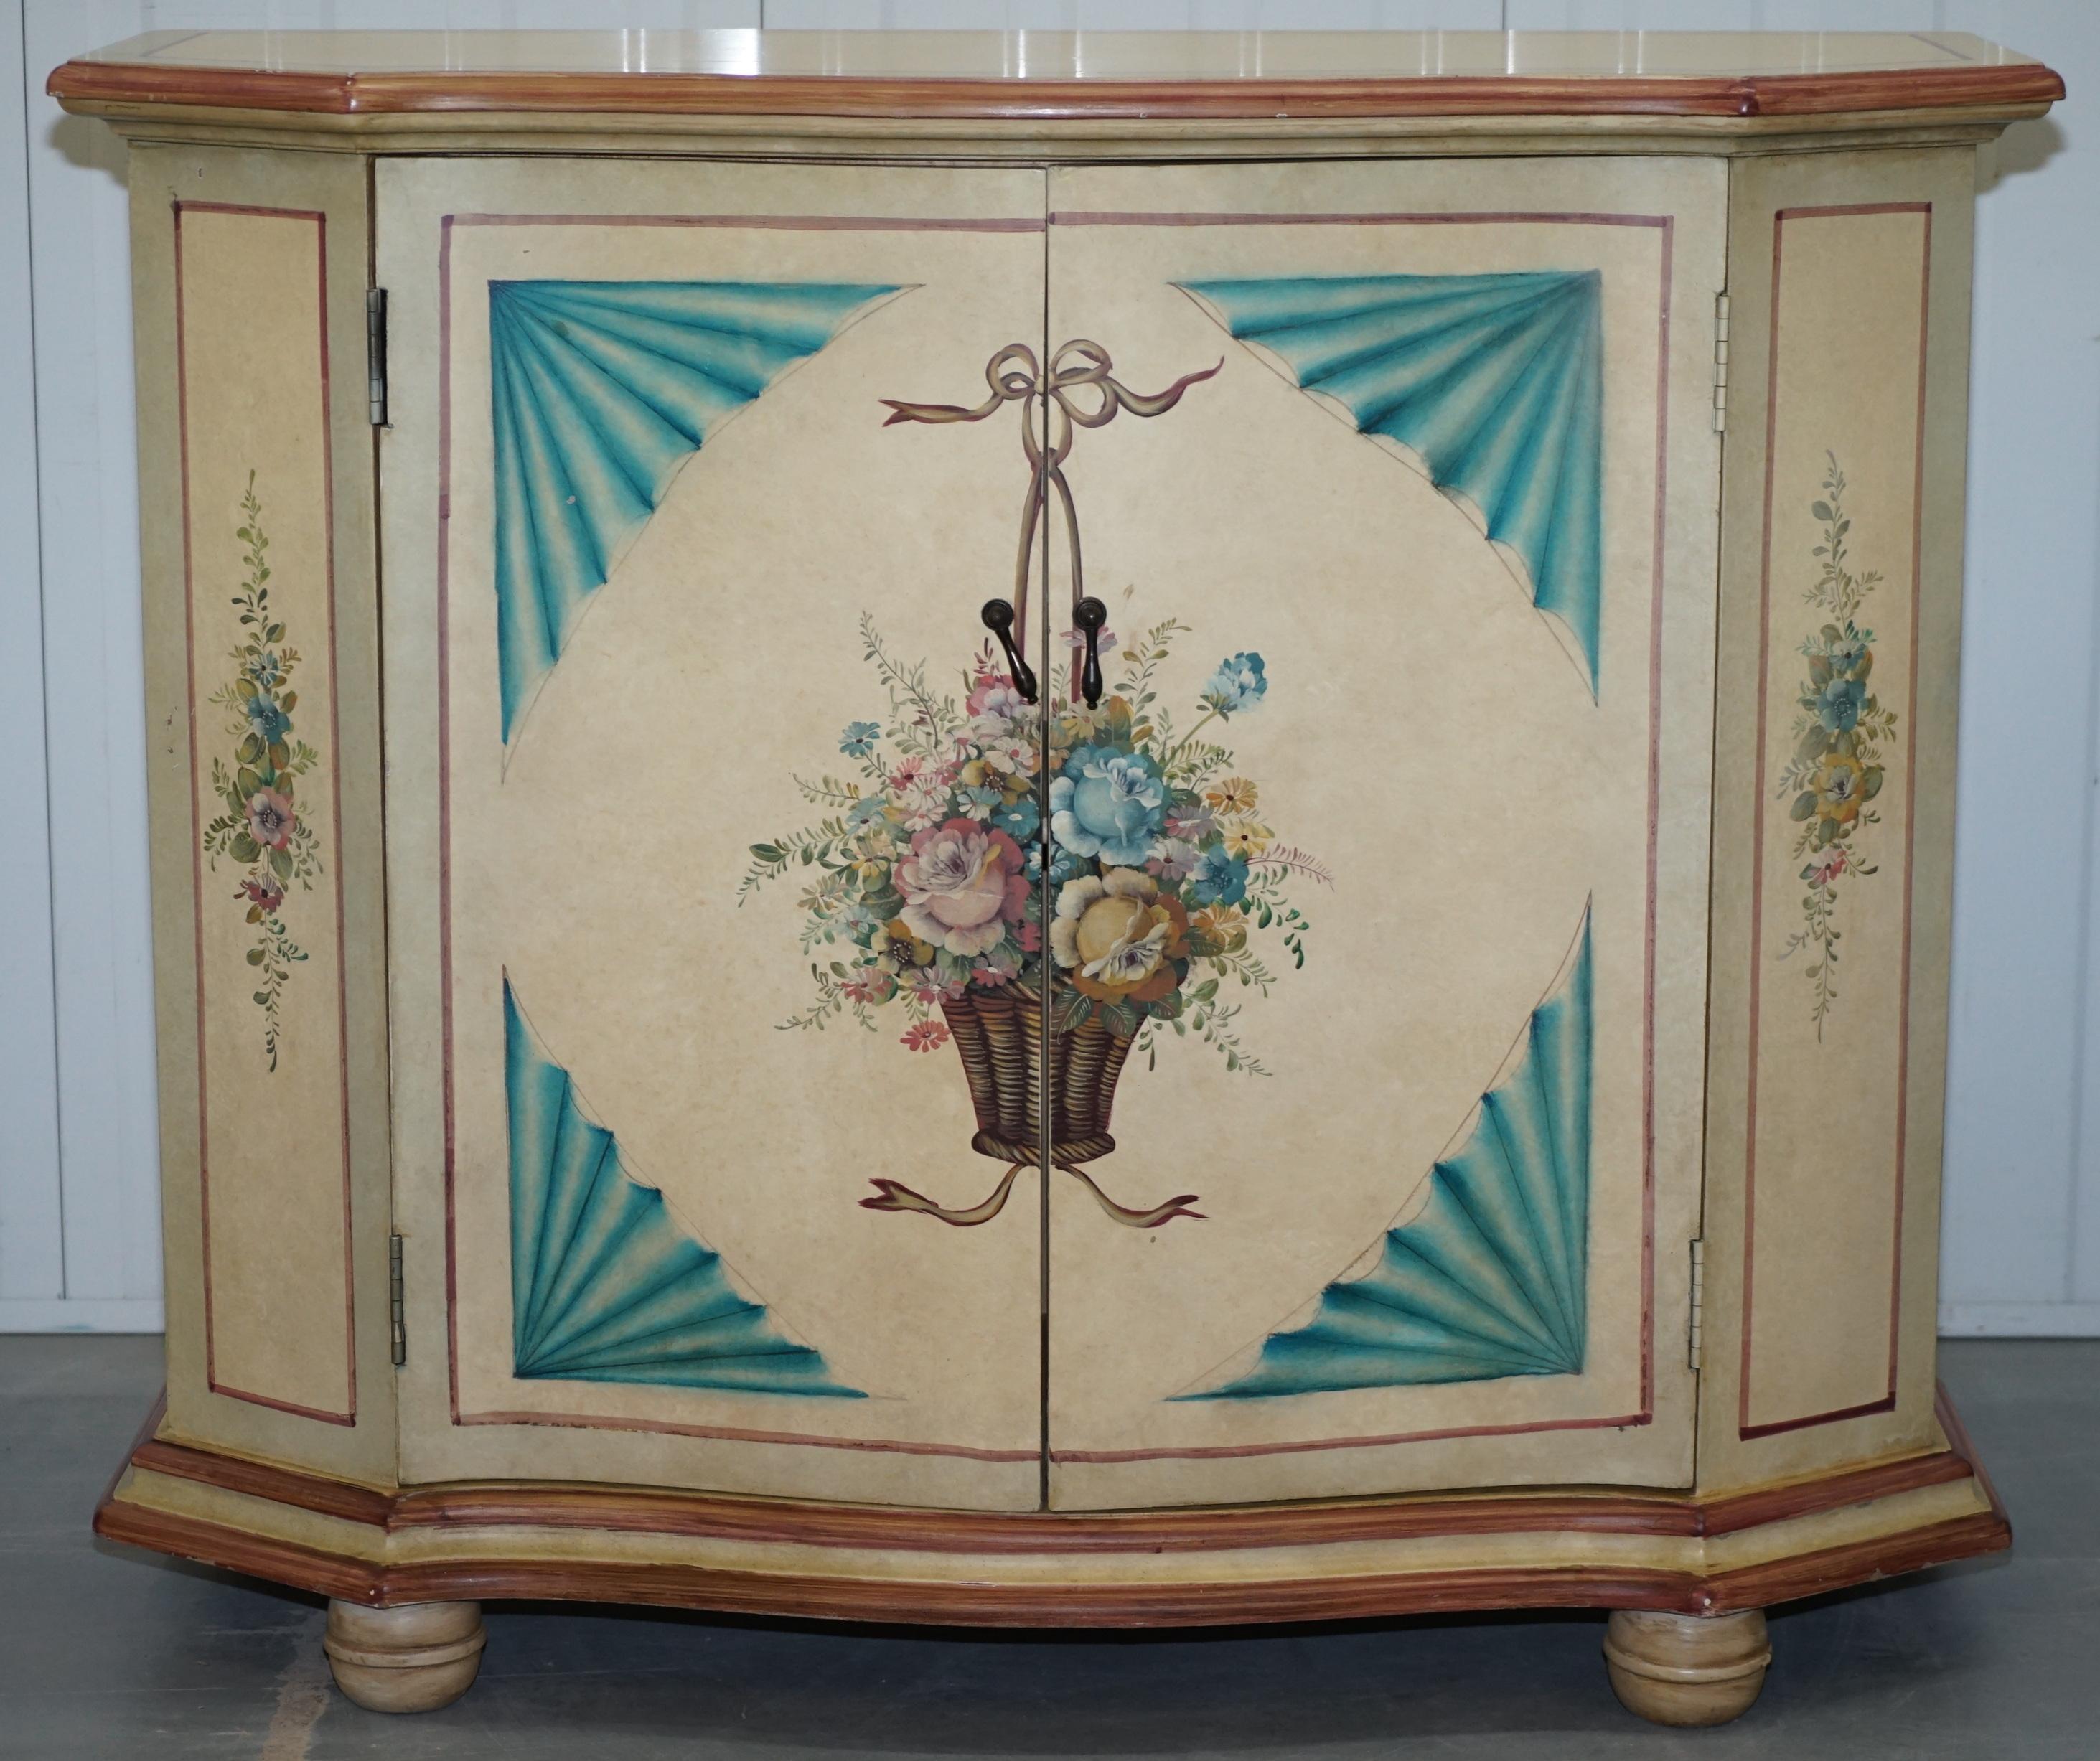 1 of 2 Vintage Painted Flowers French Serpentine Fronted Sideboards Cupboards (Holz)